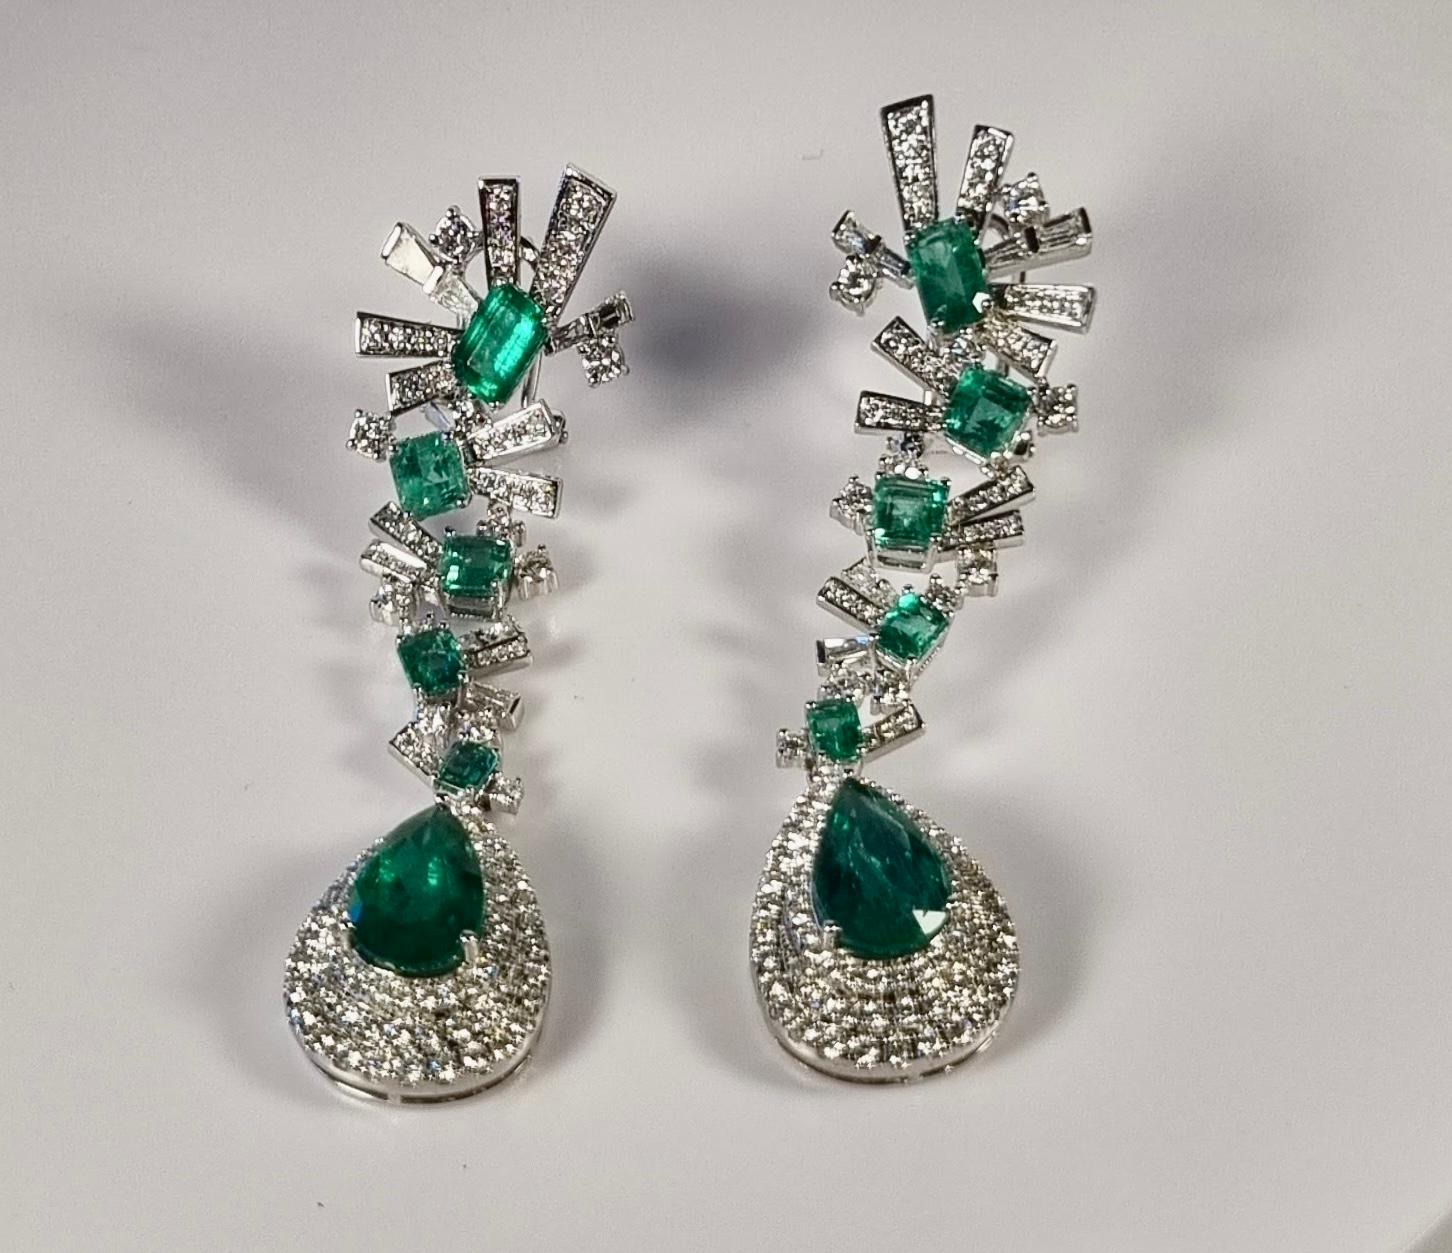 Colombian Emerald Earrings with Diamonds and Yellow Gold
Yellow Gold 10gr
Emerald 12.50ct.
Diamonds 180 total 2.4ct.
Total Weight 12.36gr

Irama Pradera is a Young designer from Spain that searches always for the best gems and combines classic with